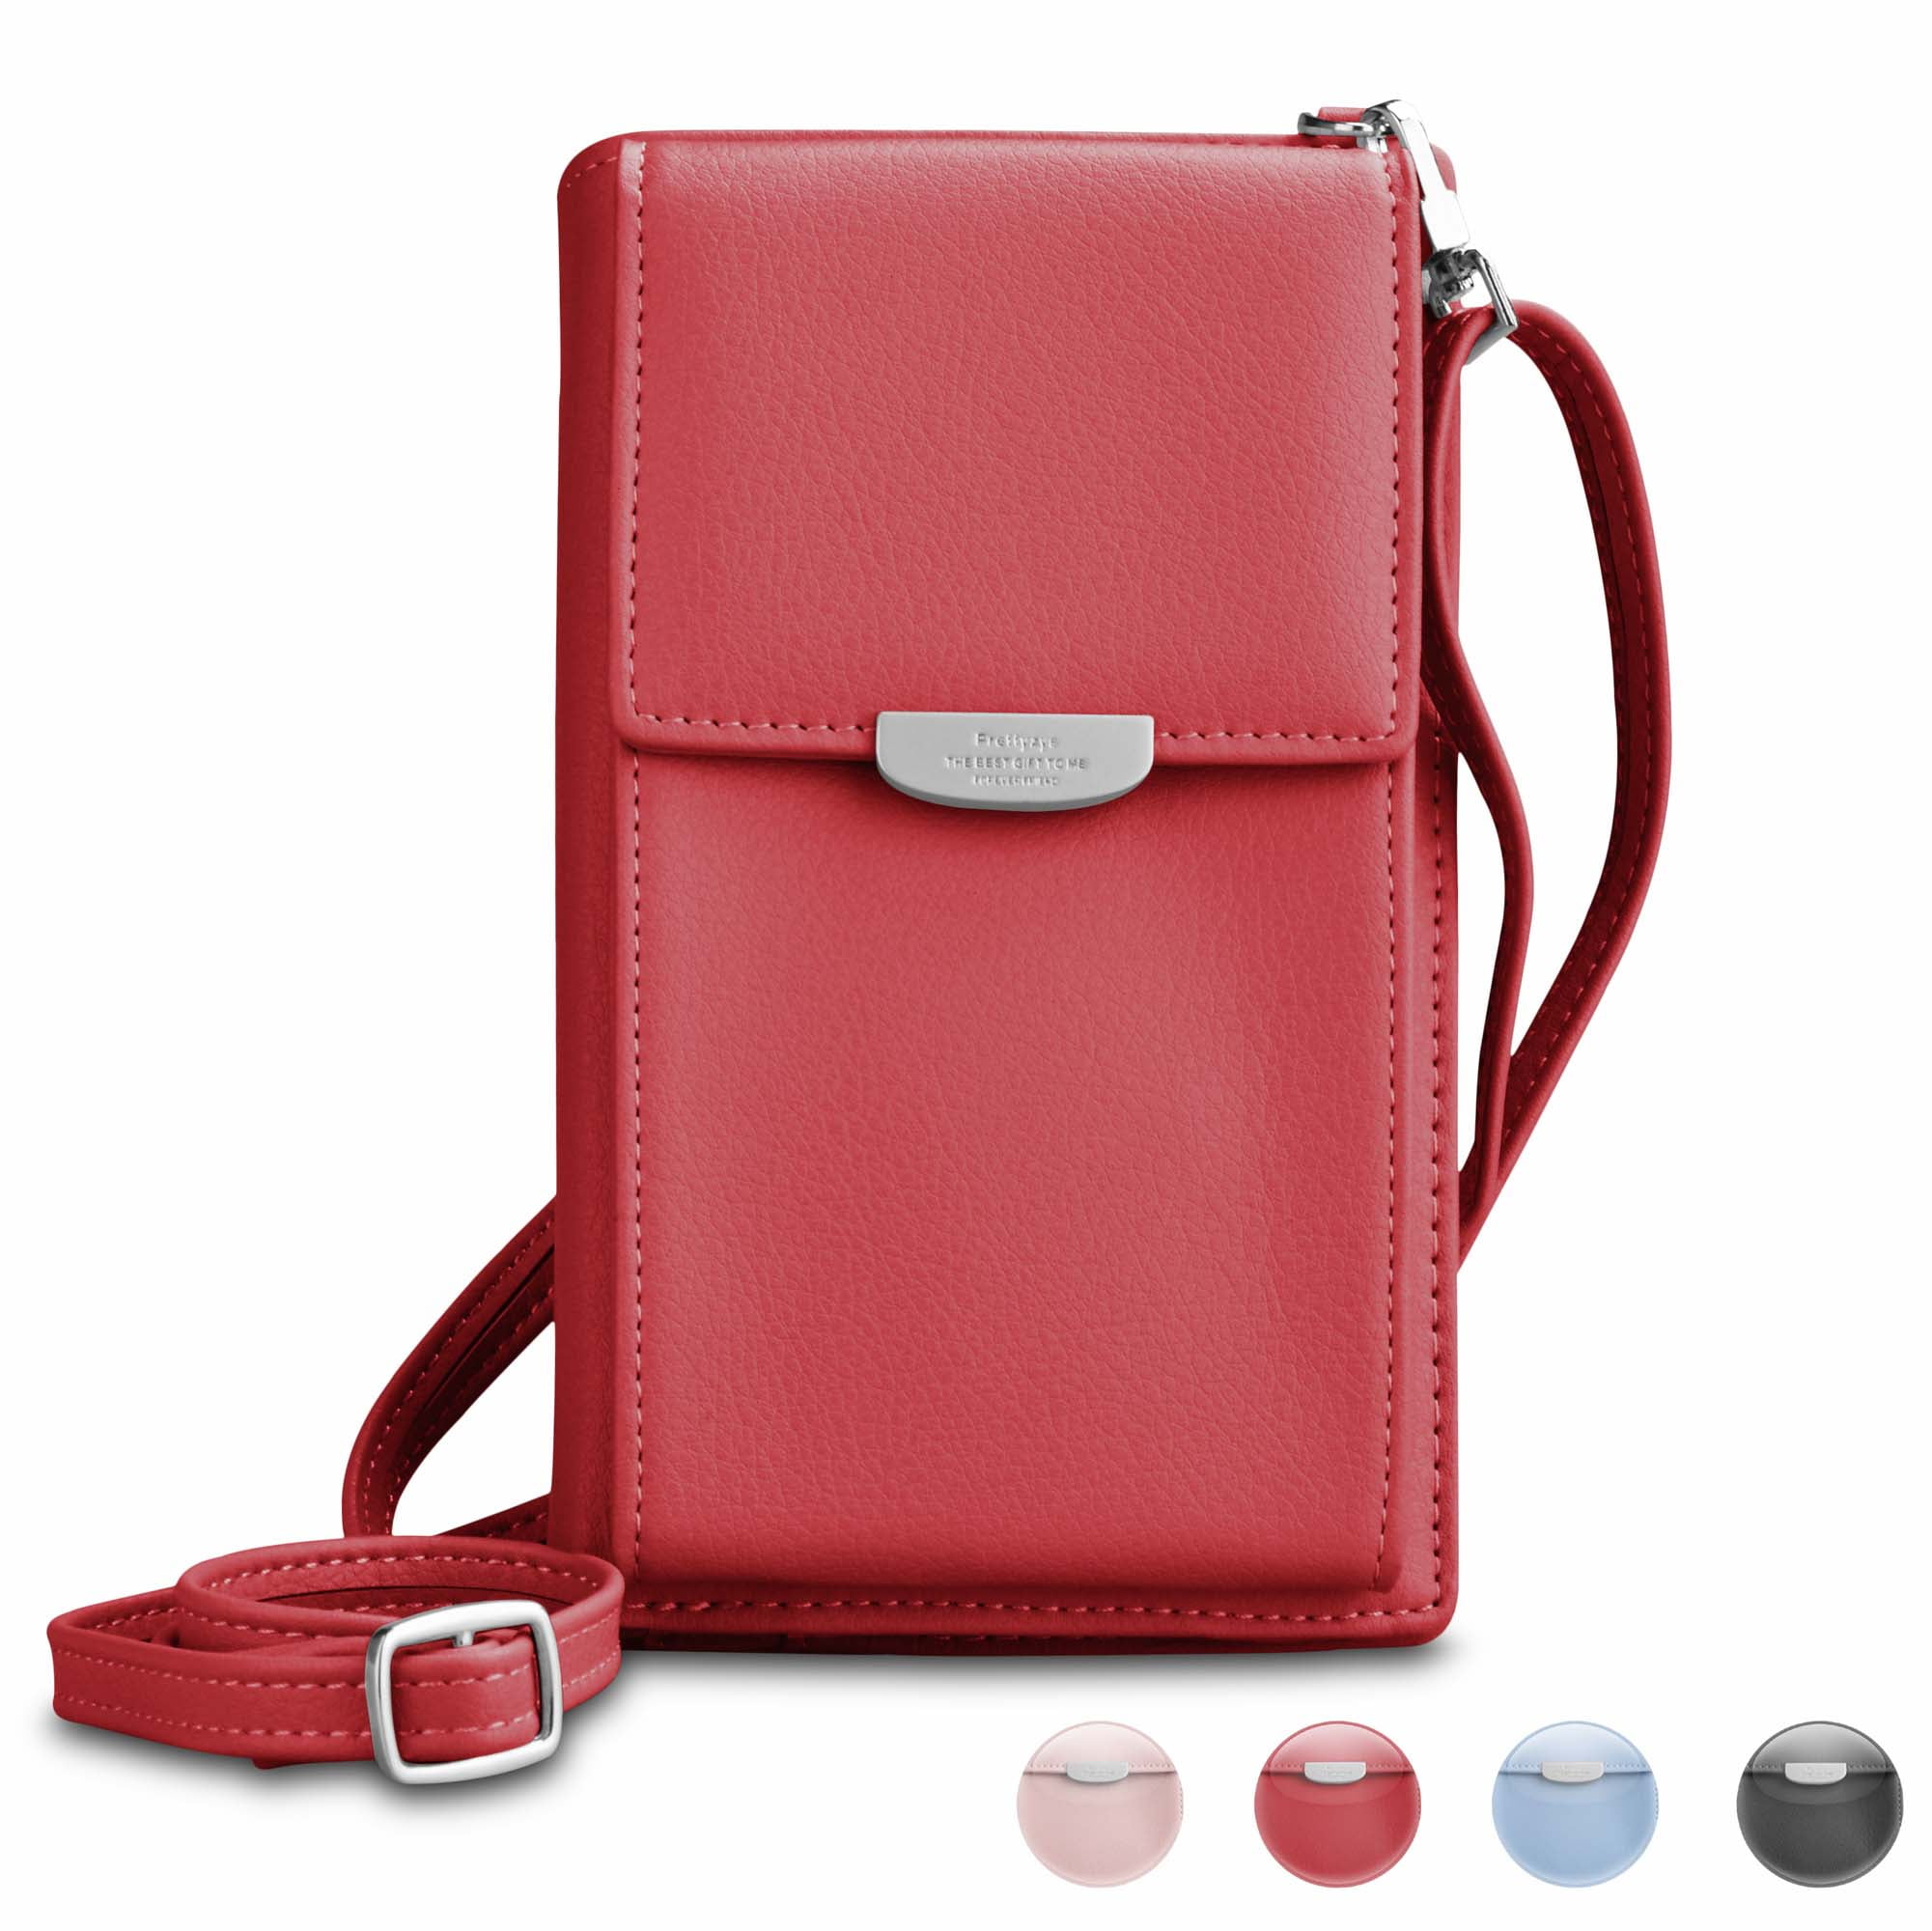 Smartphone Small Leather Crossbody Cellphone Shiny Shoulder Bag for Women